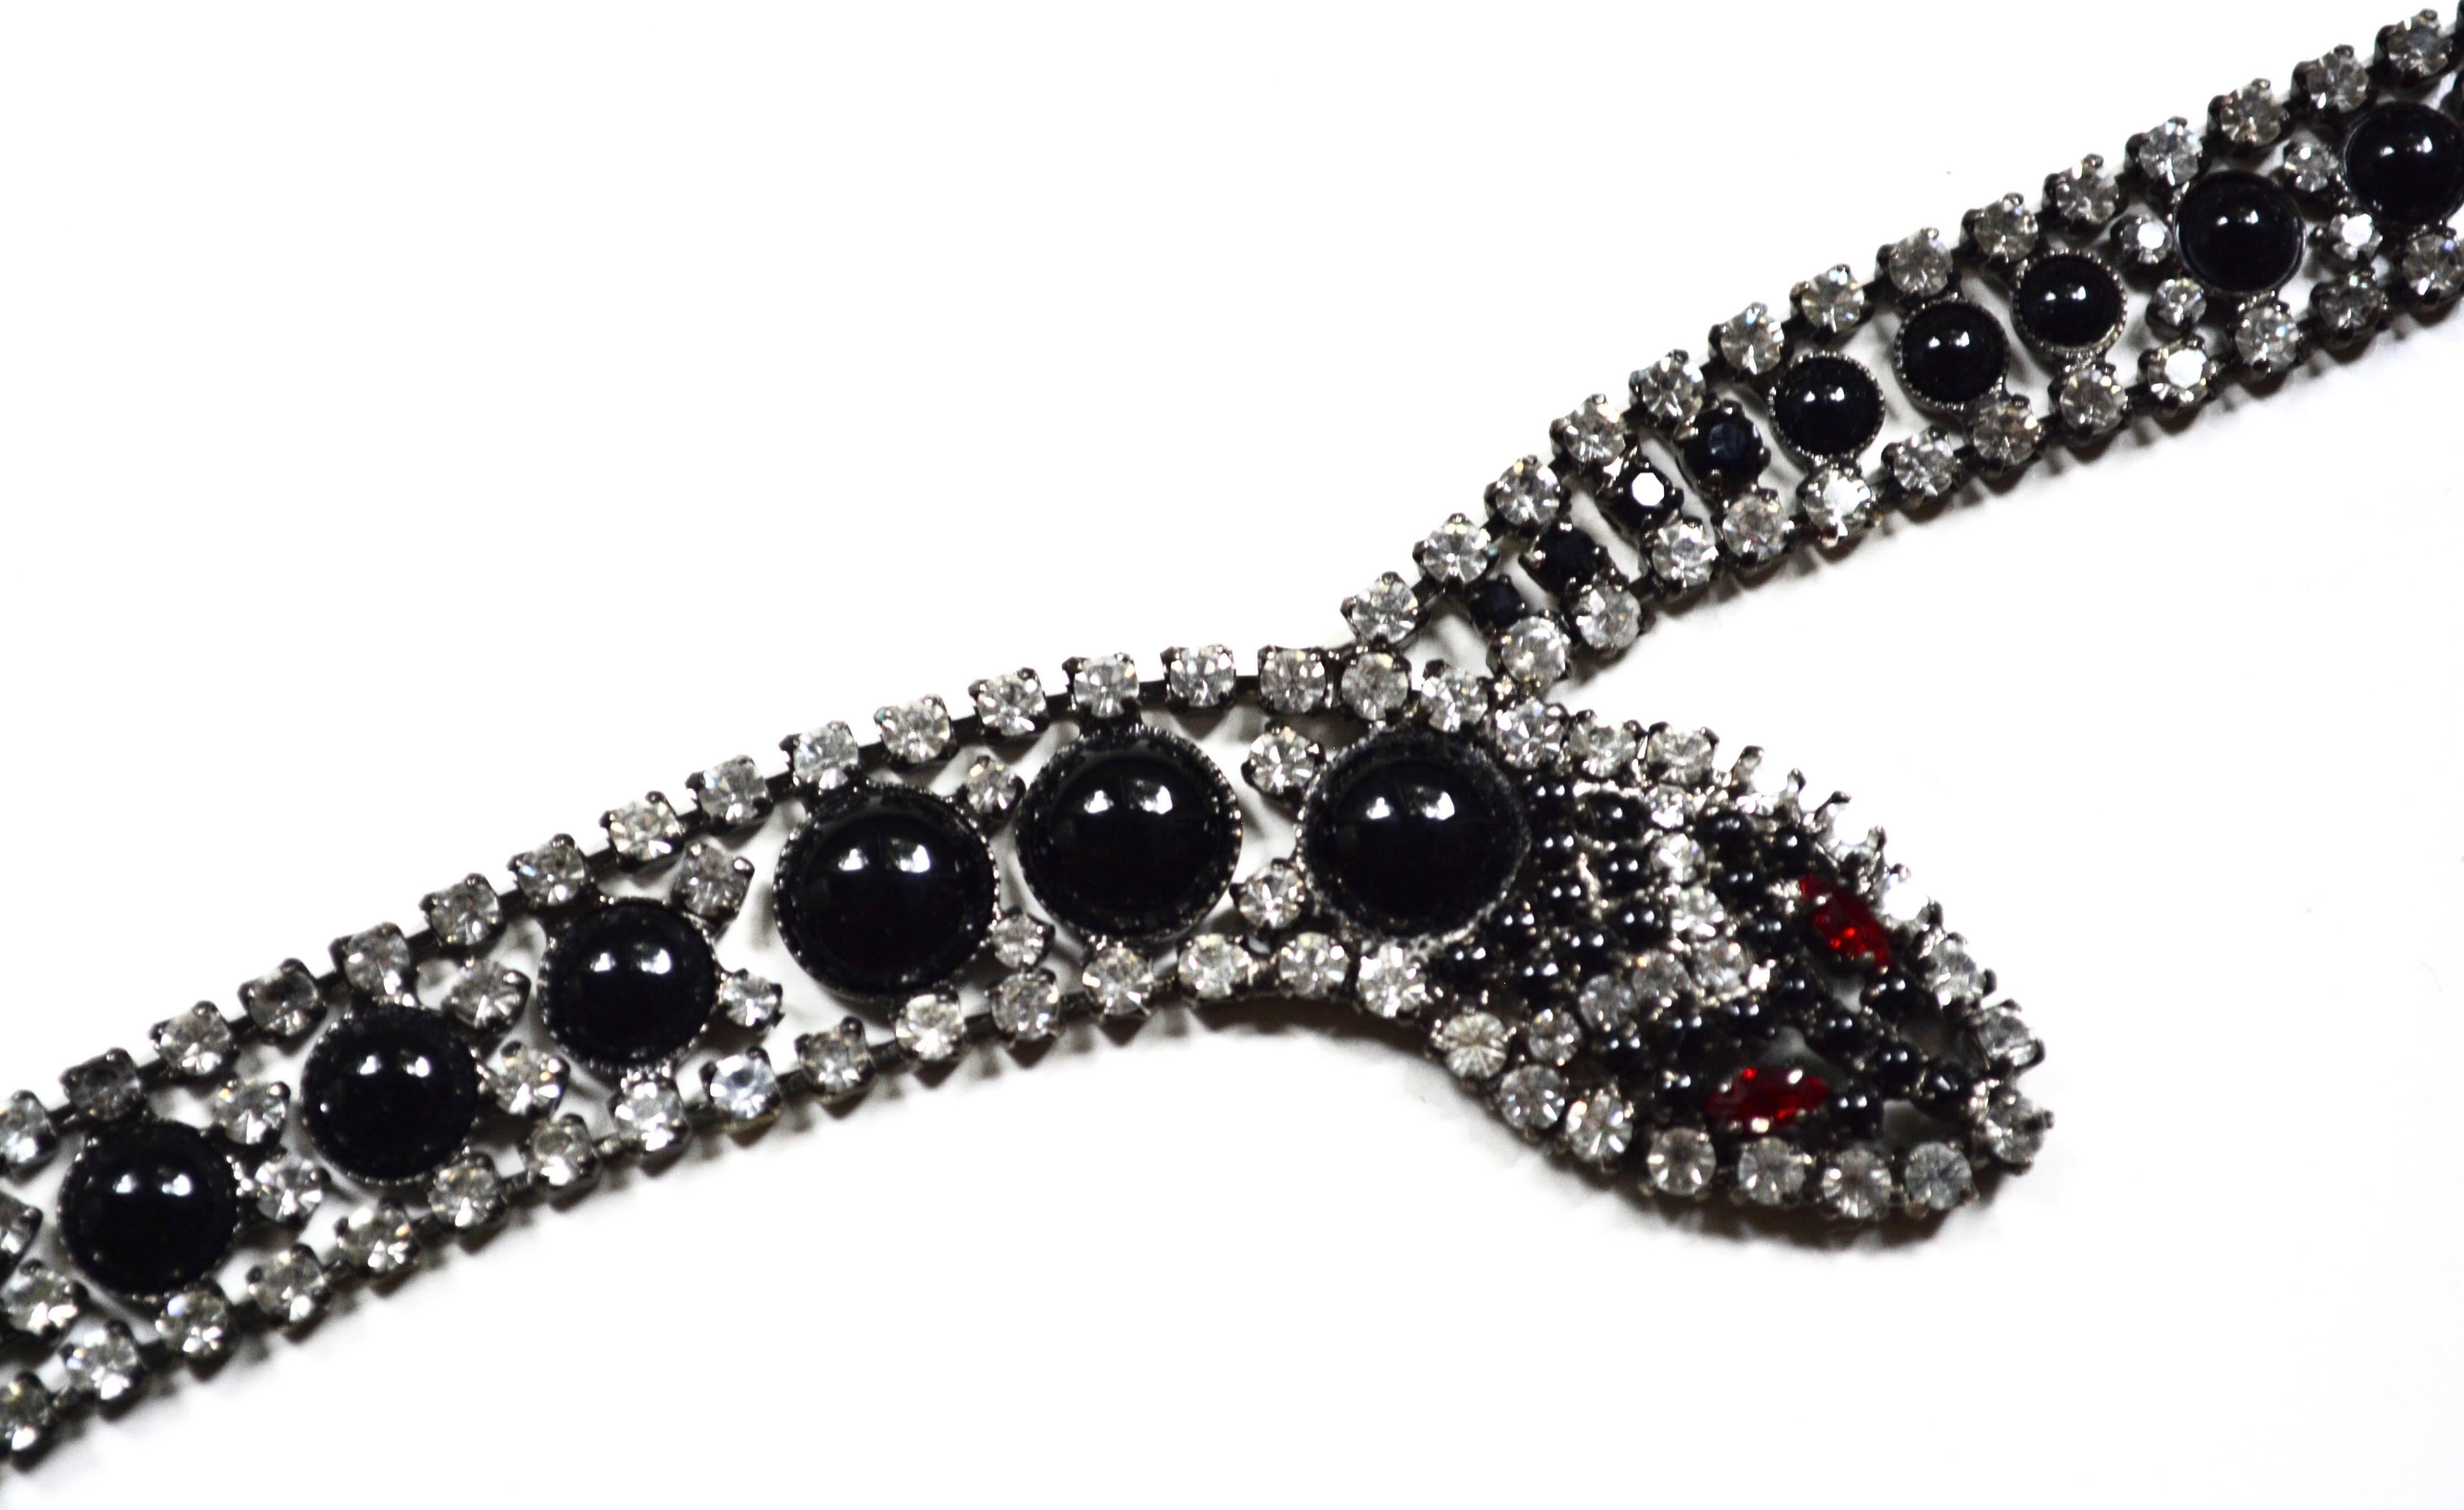 Rhinestone signed Butler and Wilson snake bracelet with black accents. They also created a necklace in this style. Red eye details. Length is 7